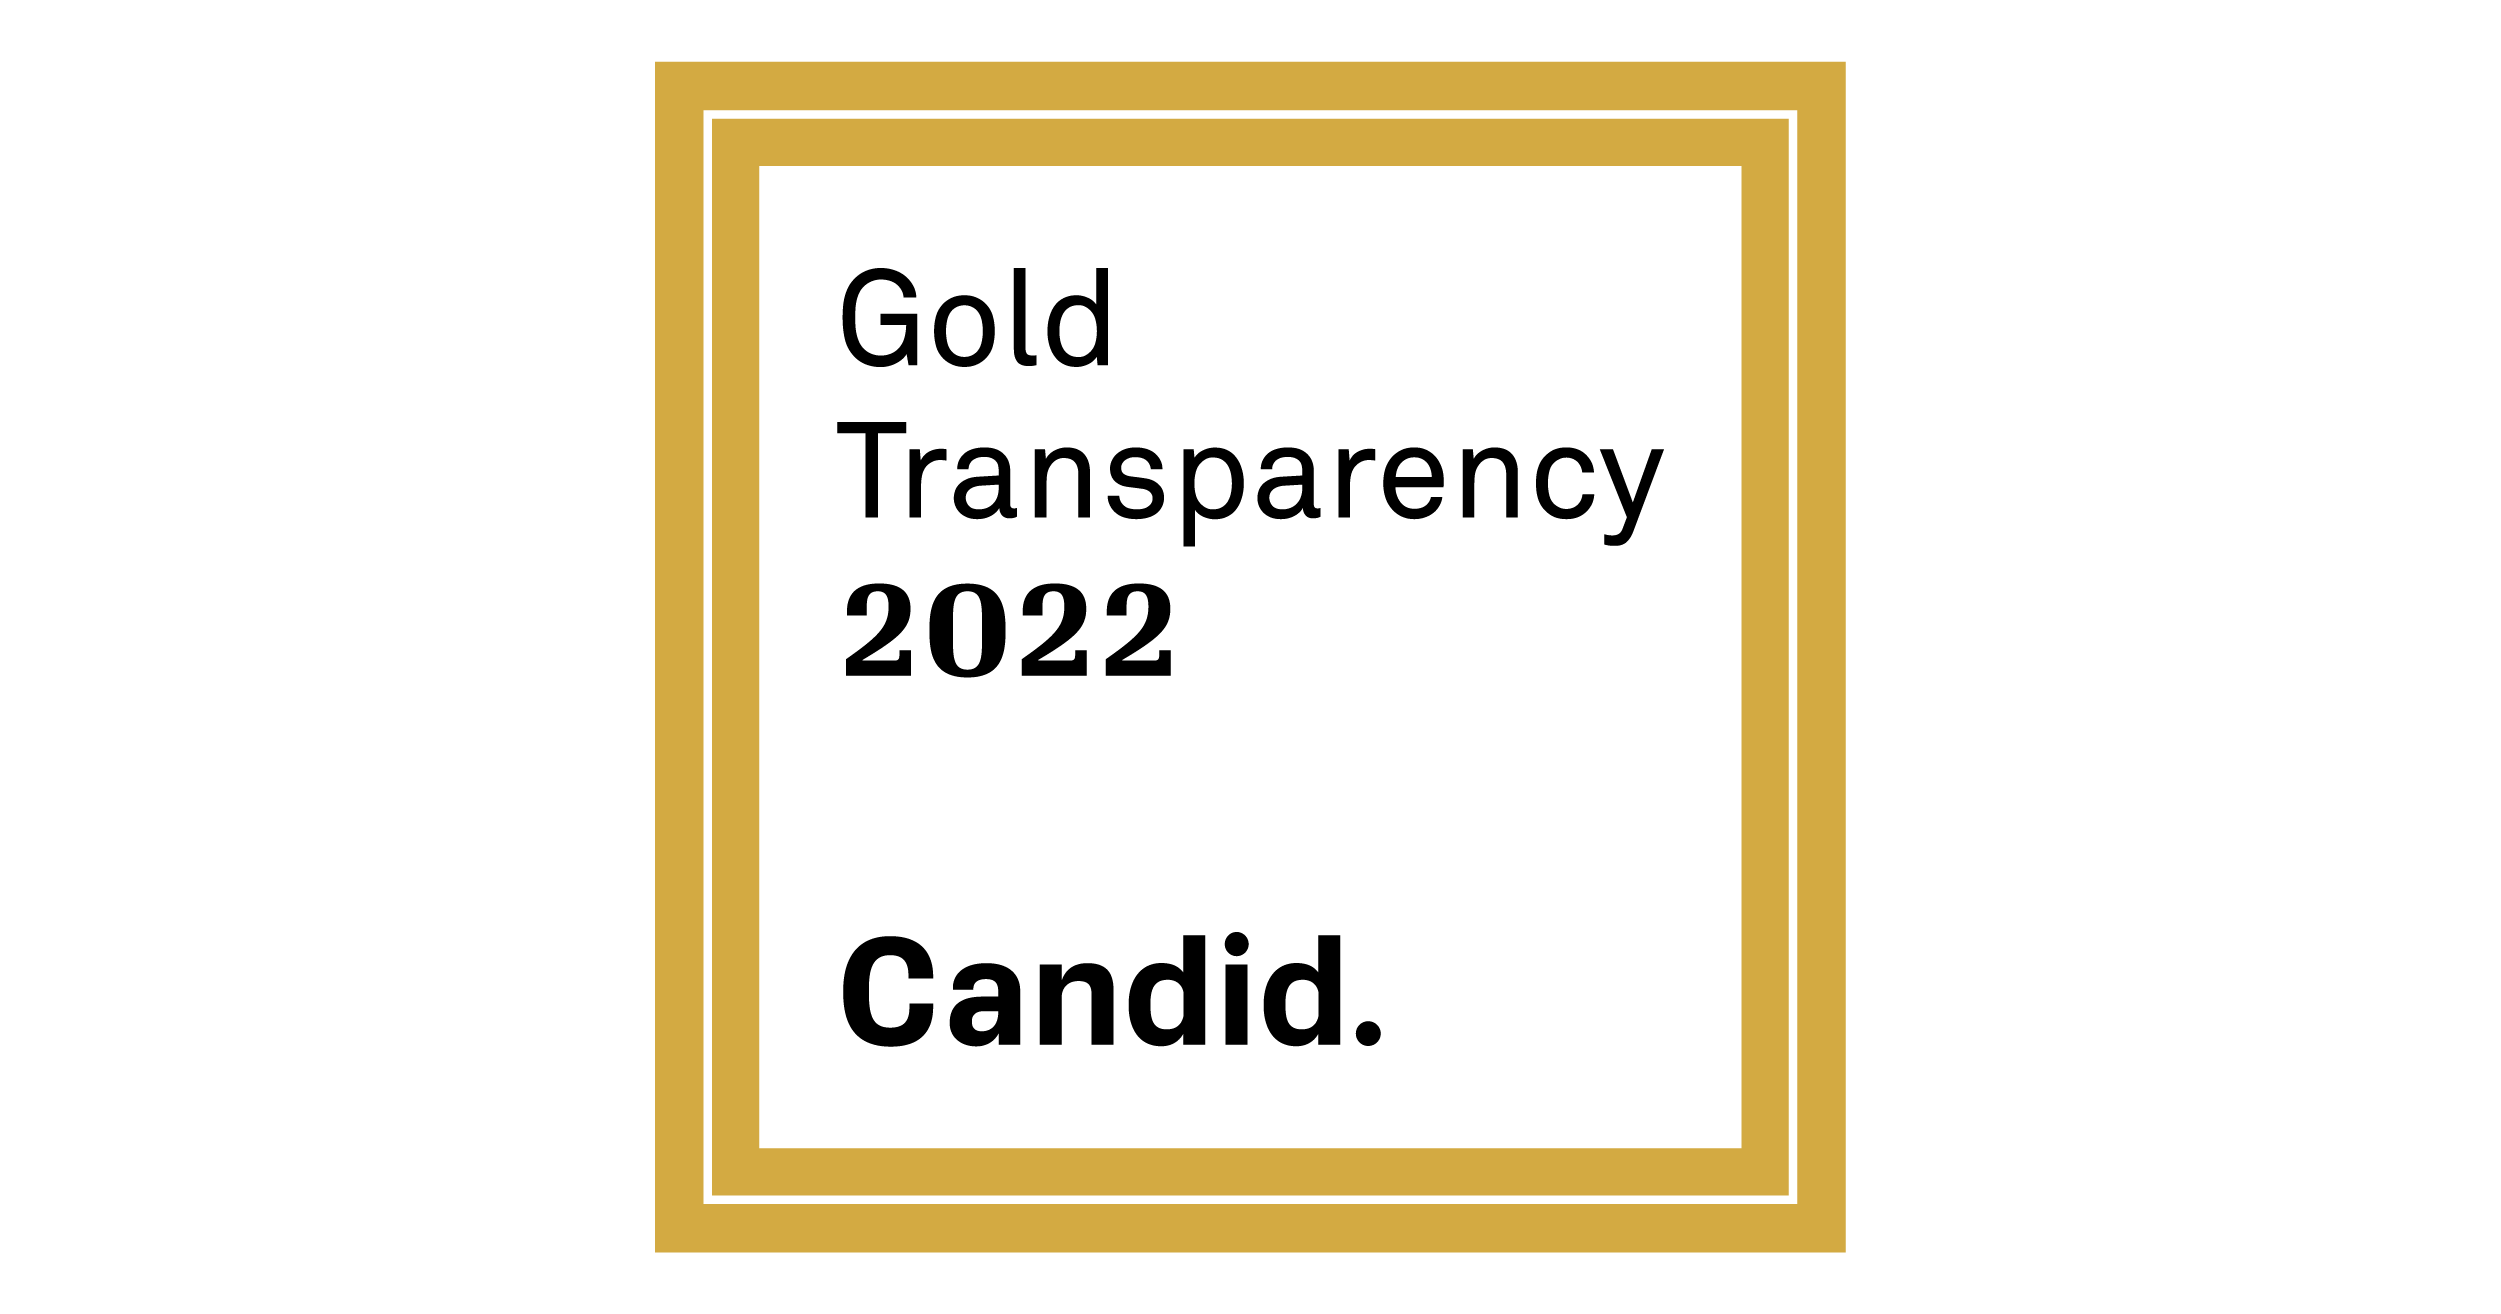 Gold Transparency 2022. Candid.